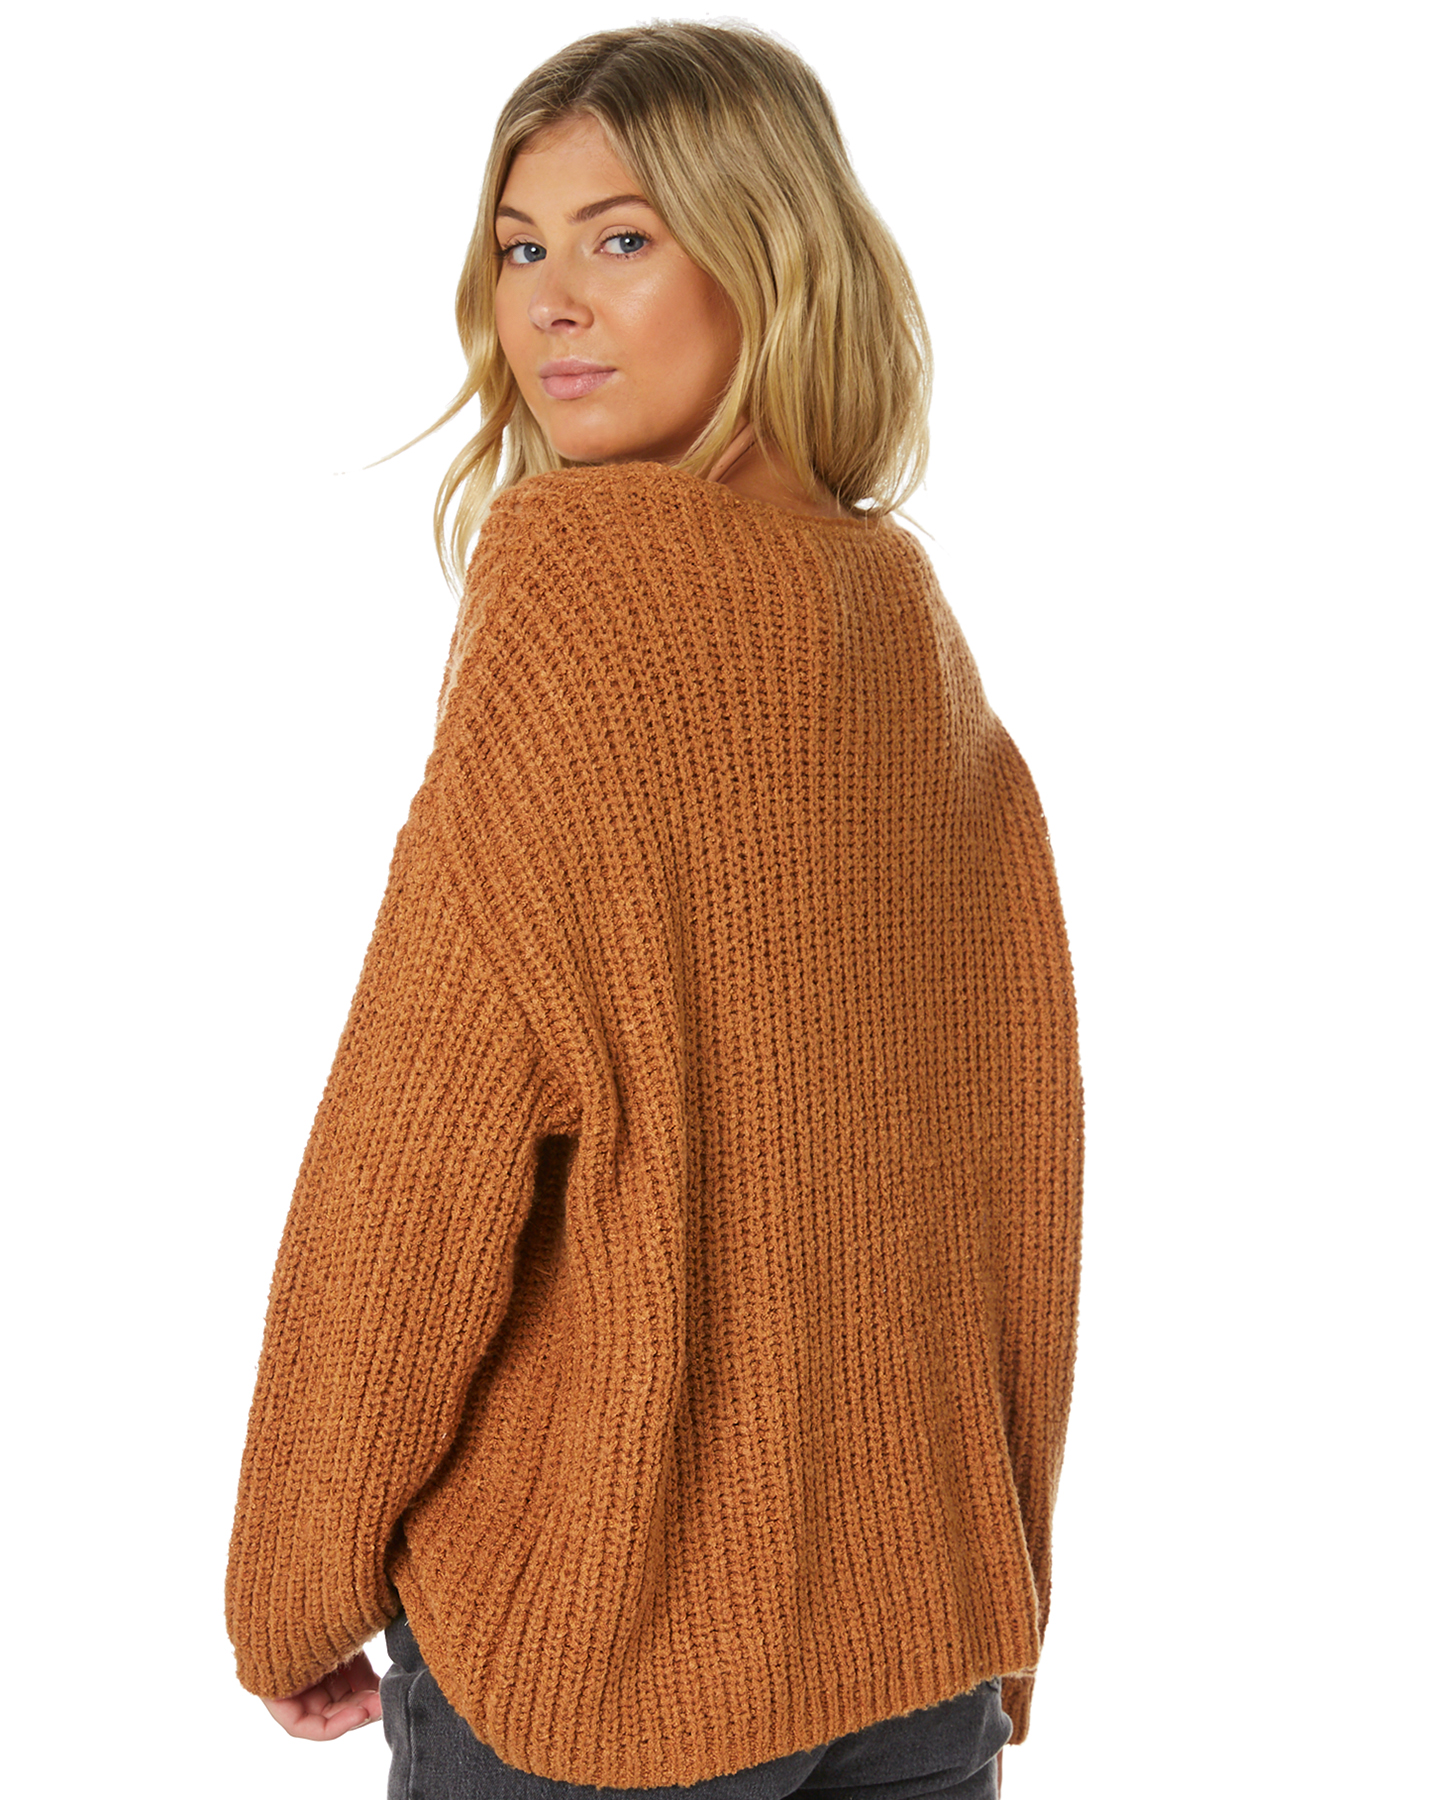 Rip Curl Woven V Neck Sweater - Light Brown | SurfStitch